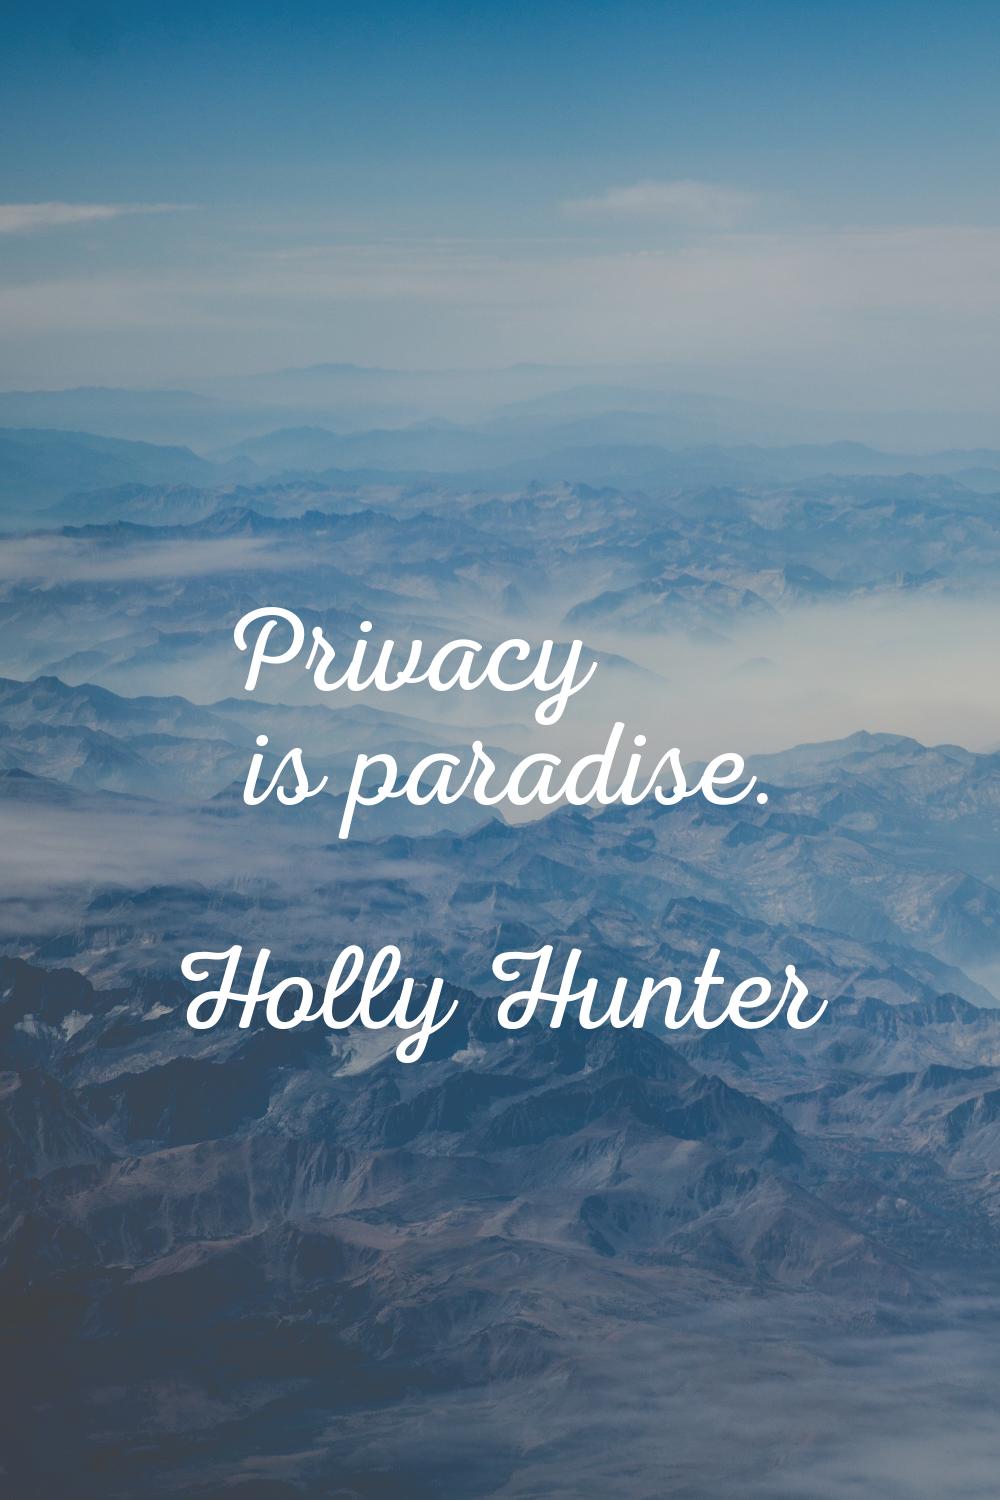 Privacy is paradise.